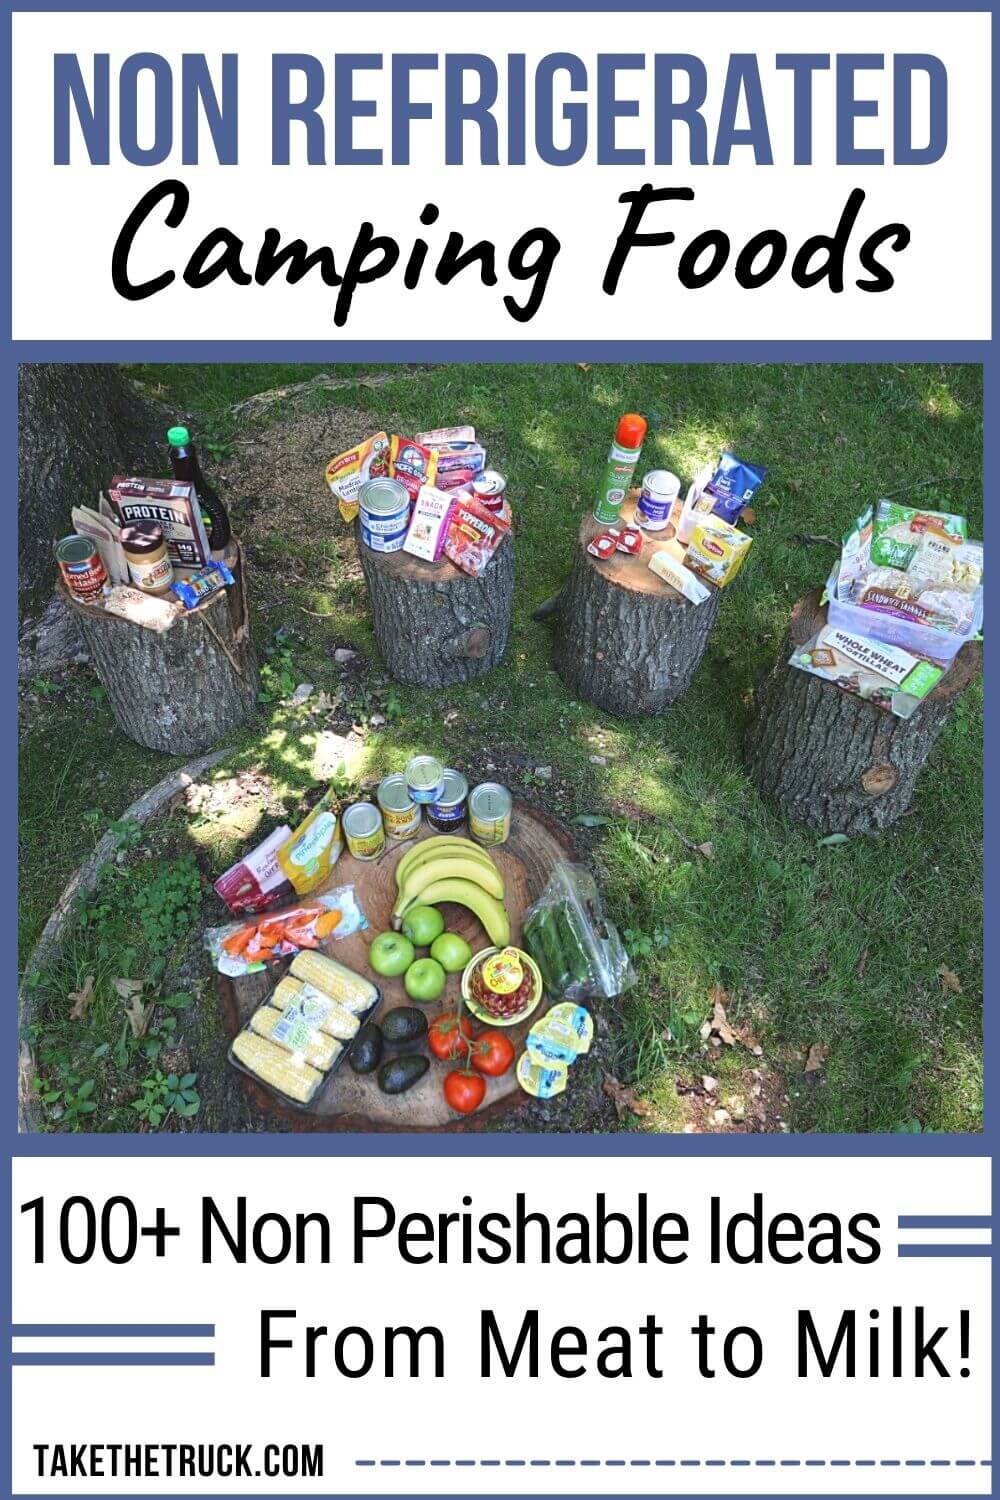 Non refrigerated camping meals with shelf stable camping food ideas! No cooler camping food and no fridge camping meals - 100+ non perishable camping foods for easy camping meals with no fridge.